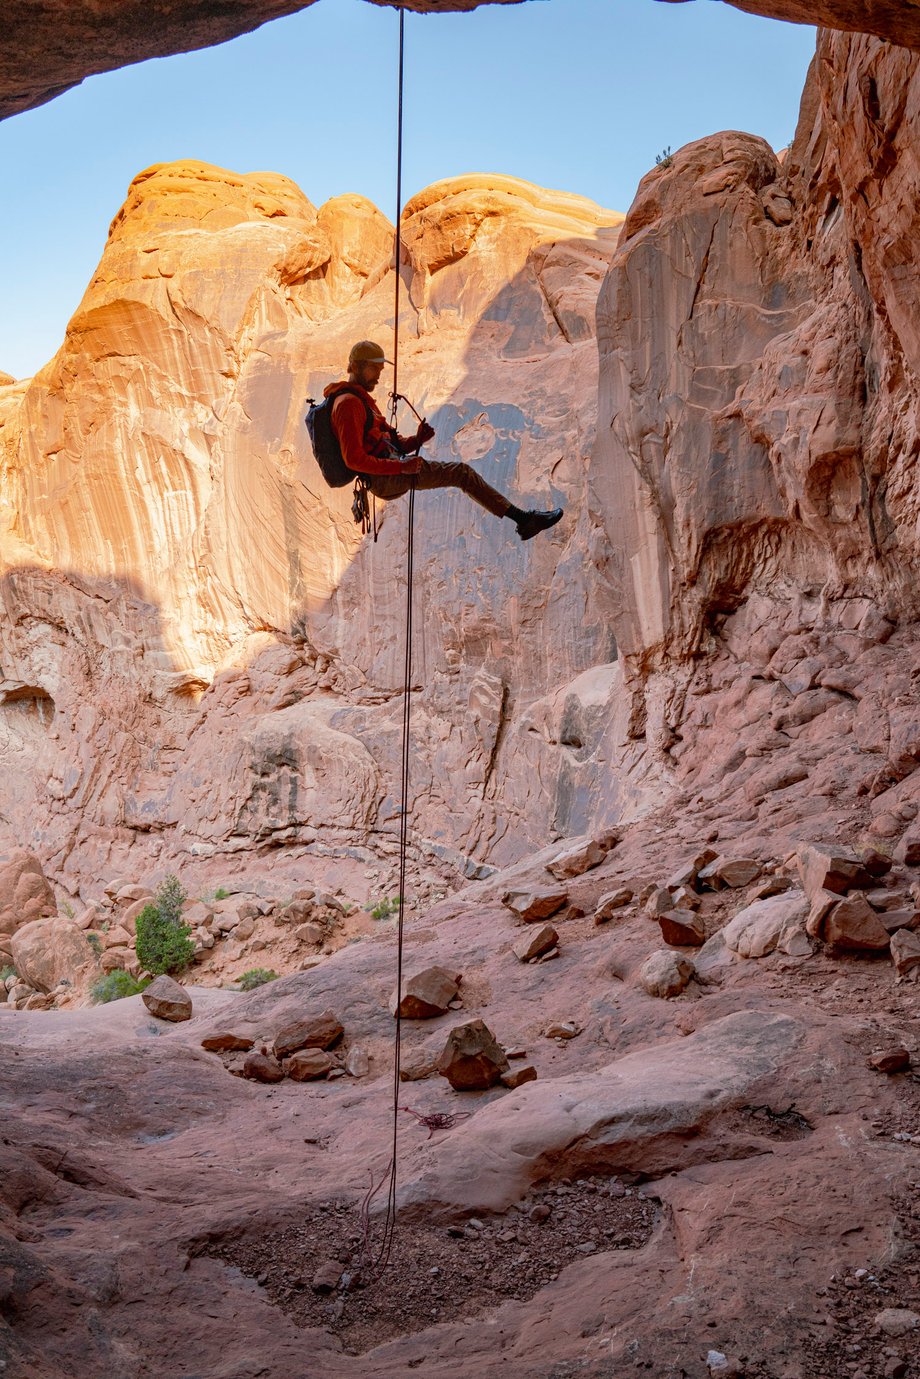 Dalton Johnson photographs male climber dangling from the rock in Moab for Coalatree and Gregory Packs